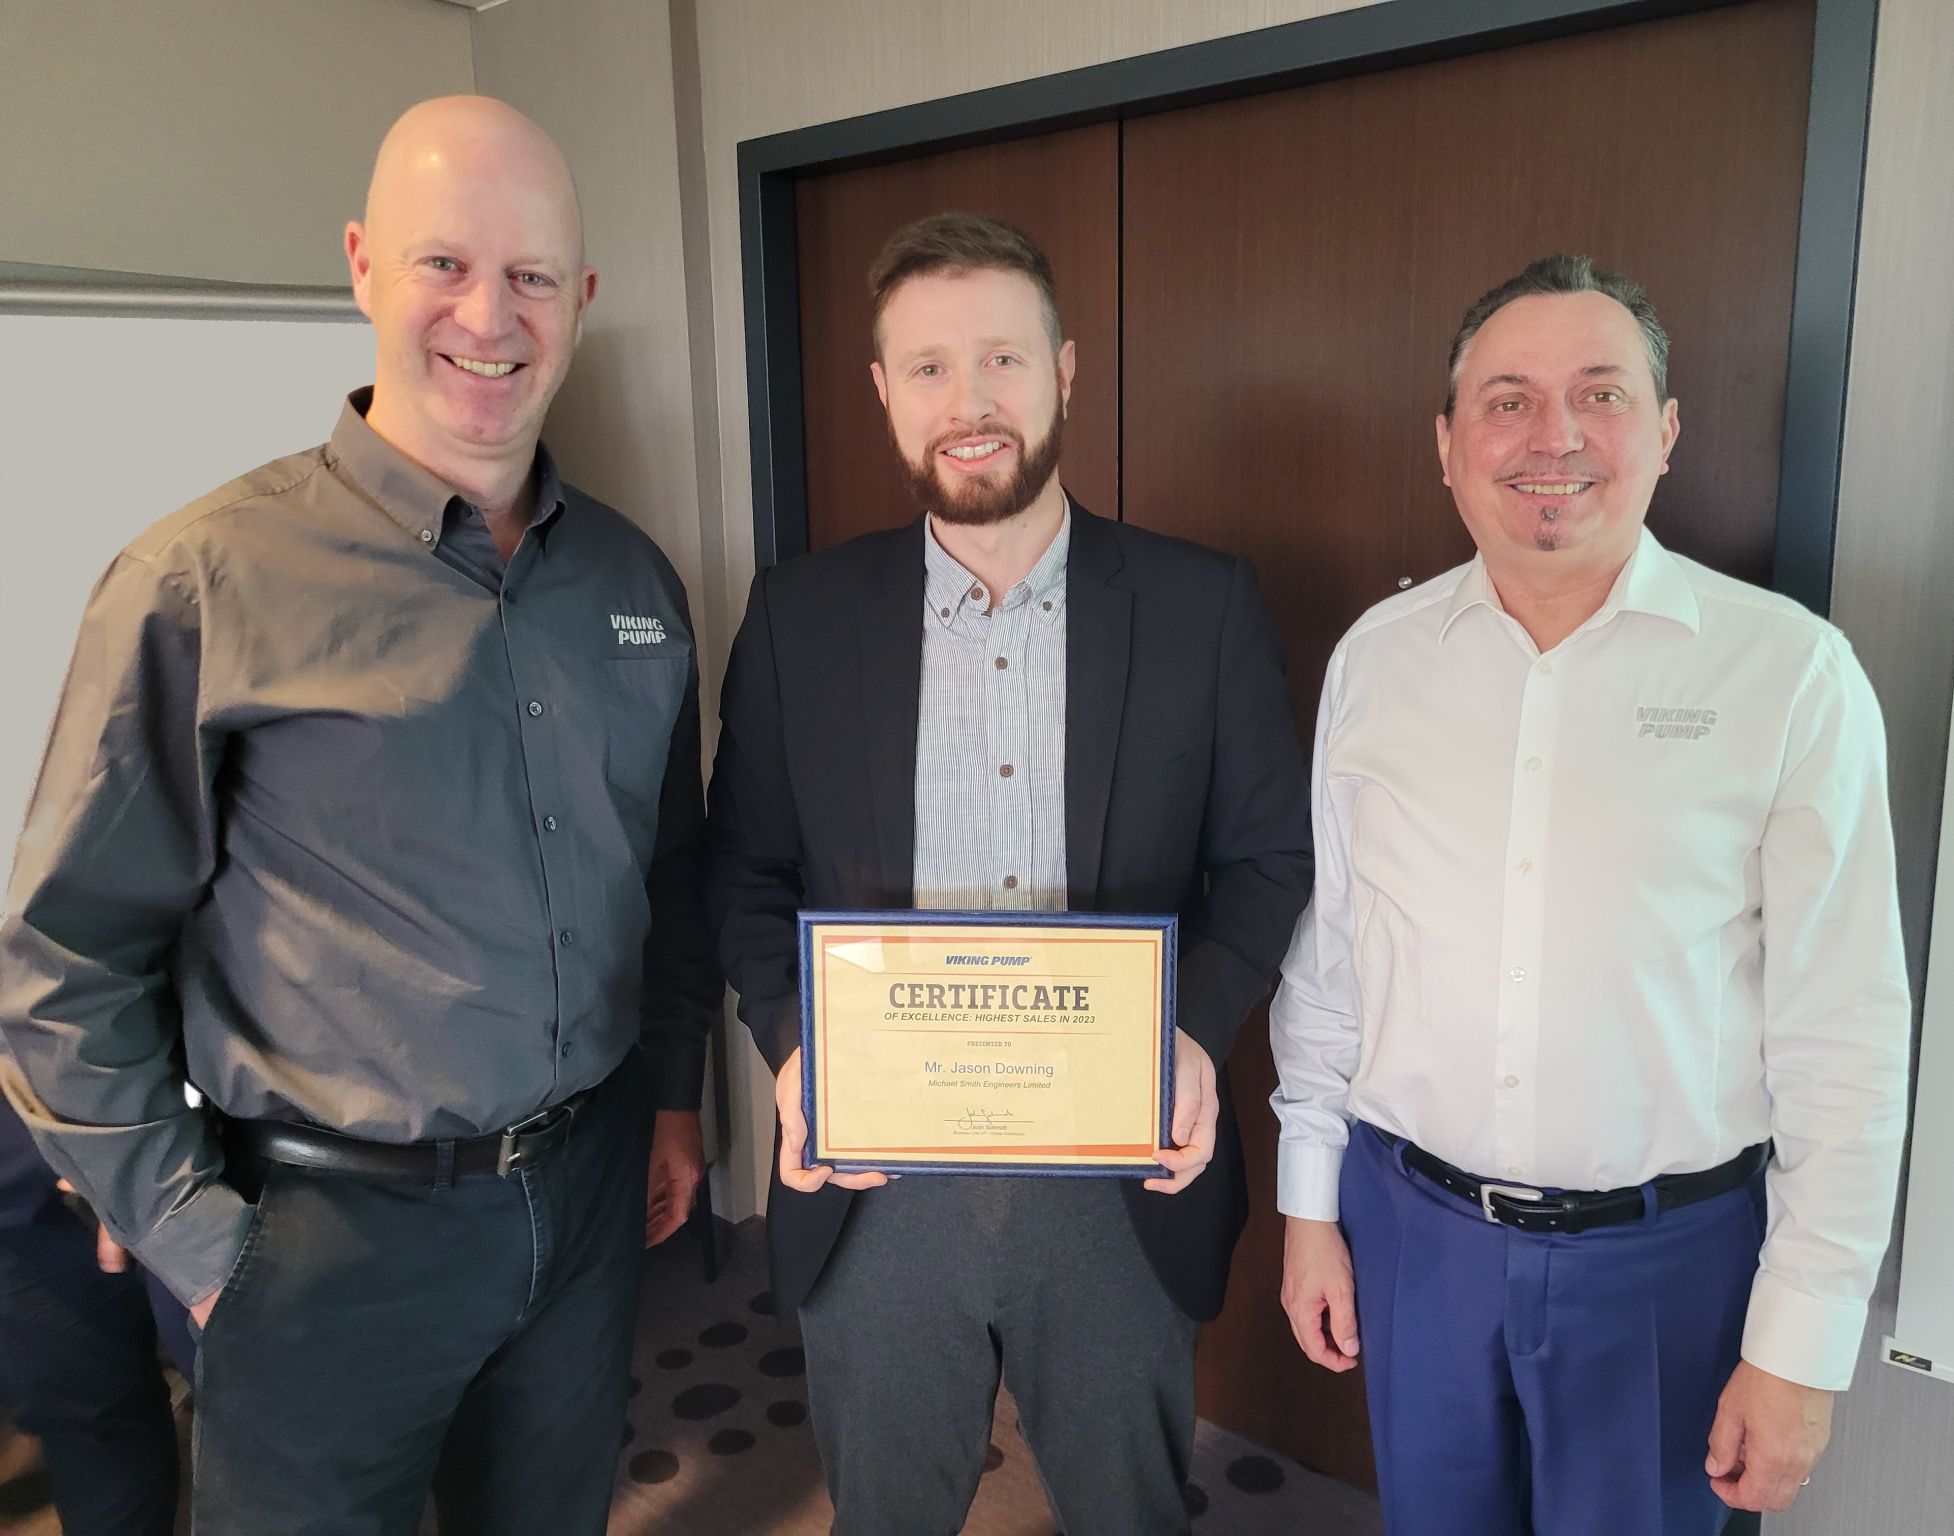 Viking pump certificate of excellence awarded to Michael Smith Engineers